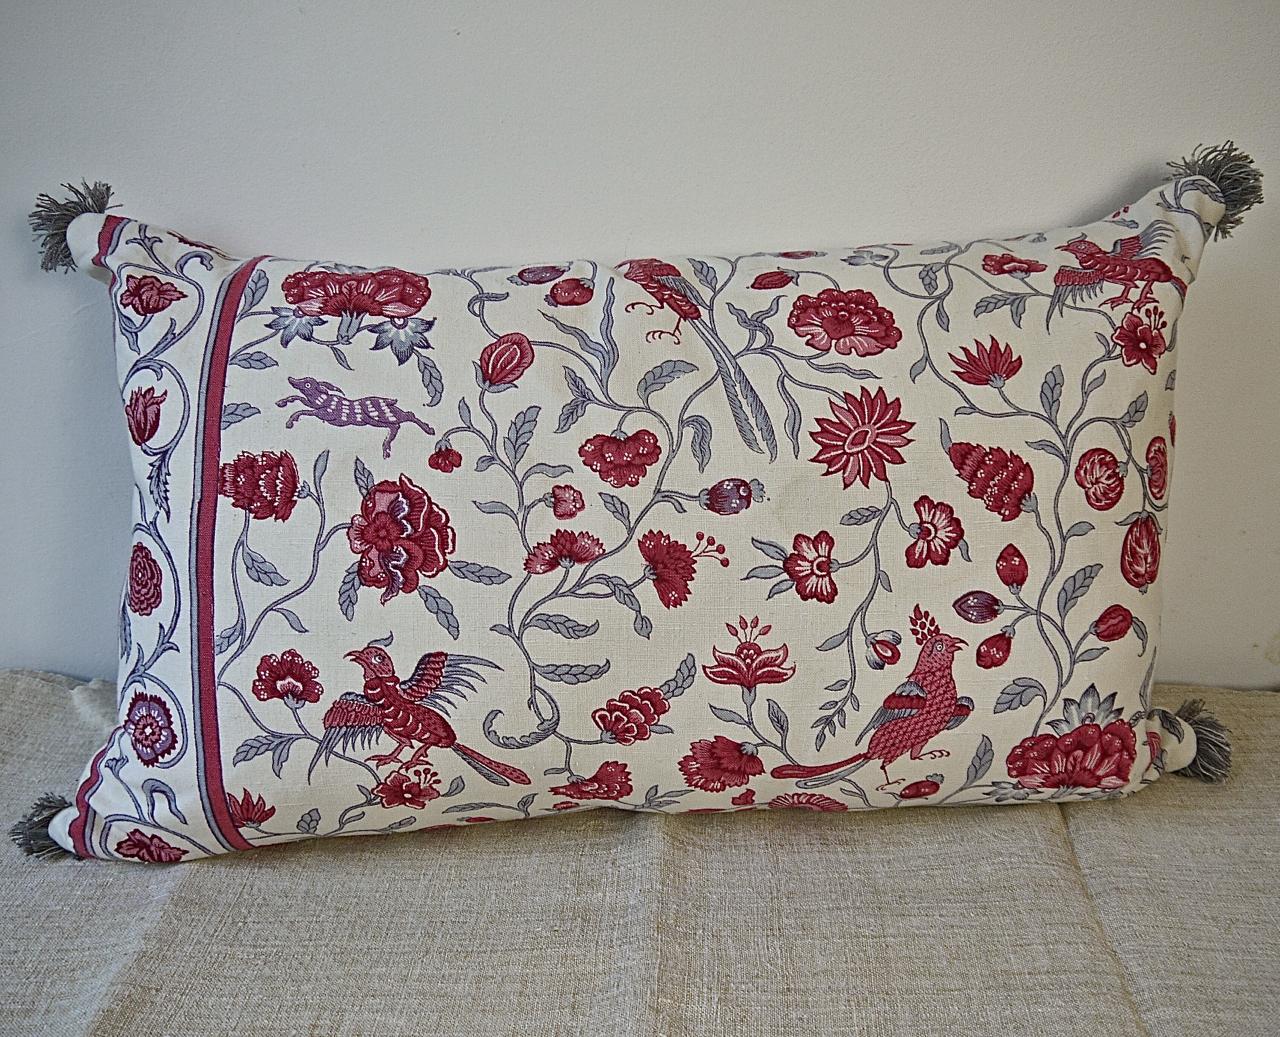 Early 20th century French linen cushion printed with stylized exotic birds and animals in raspberry red and pink with grey meandering branches and leaves. Vintage French grey cotton fringing on each corner. Self-backed and slip-stitched closed with